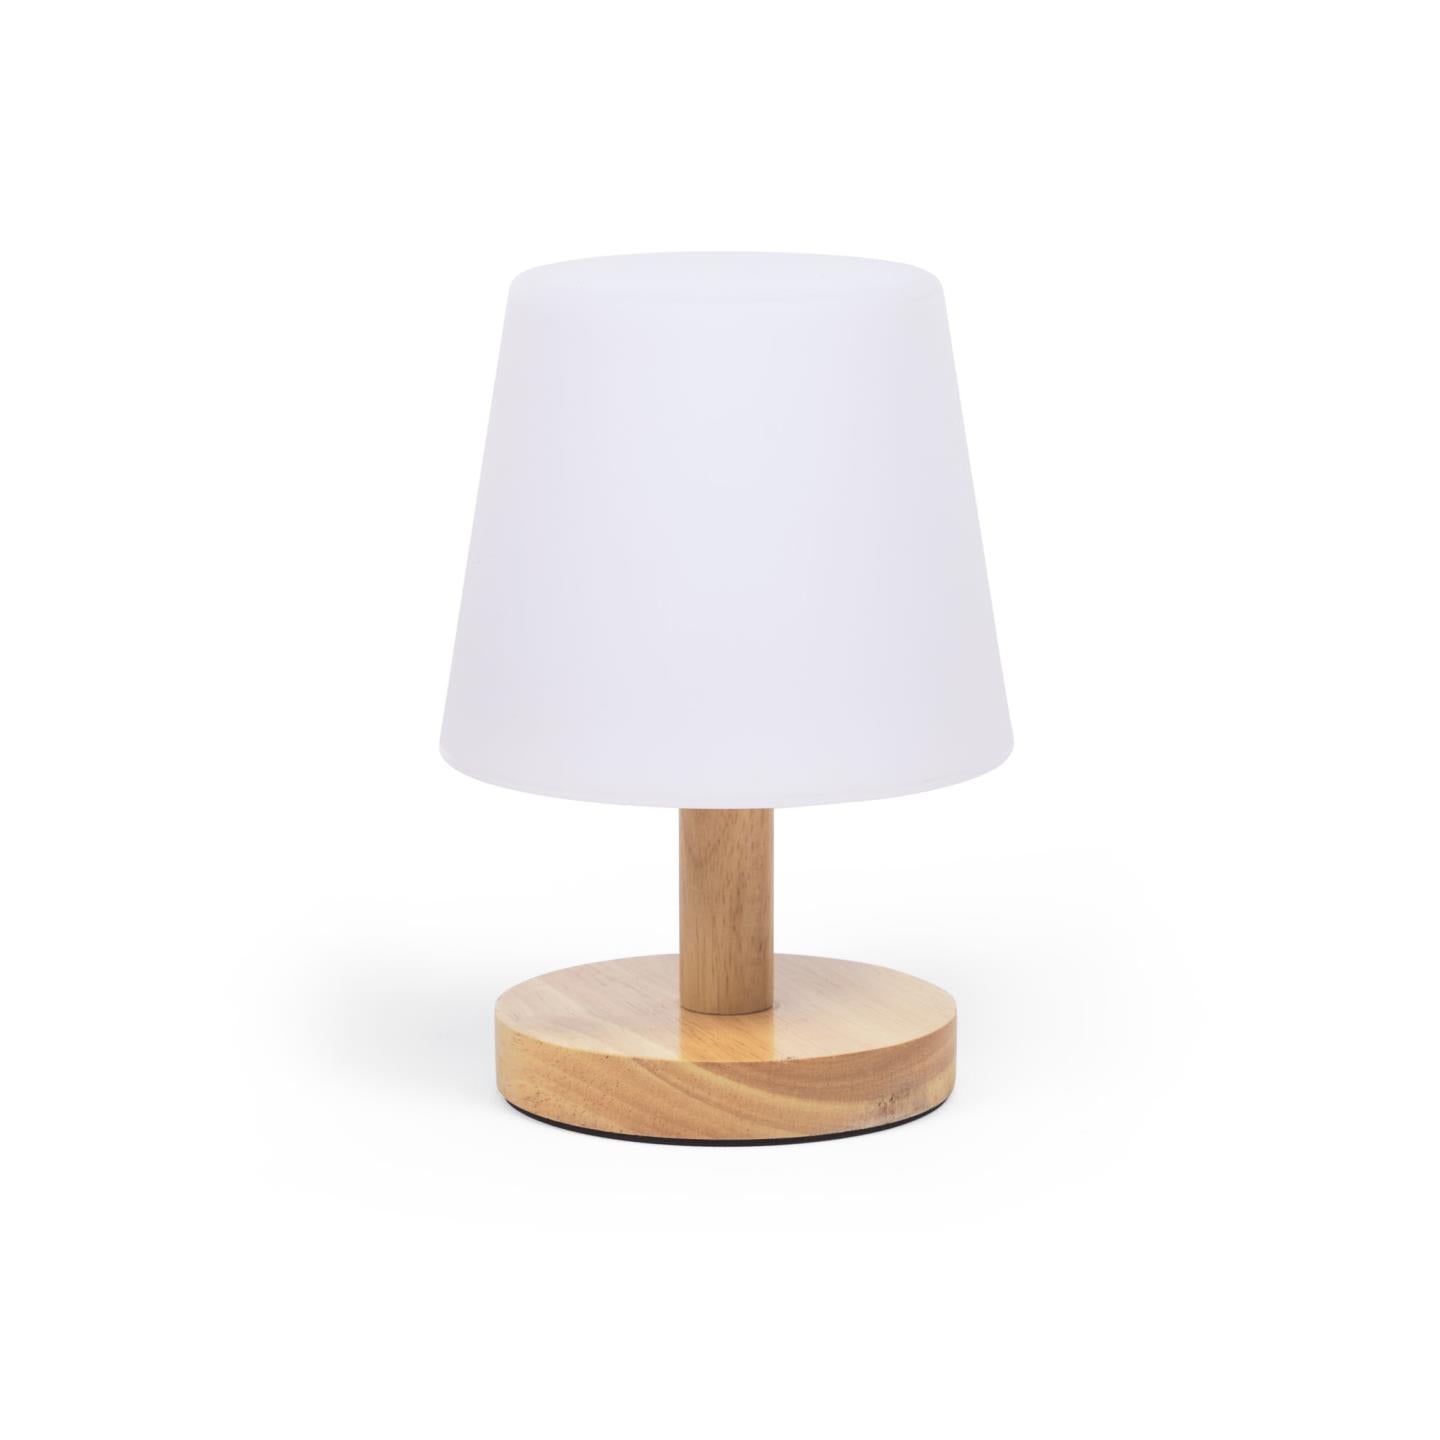 Ambar table lamp in polythylene and wood